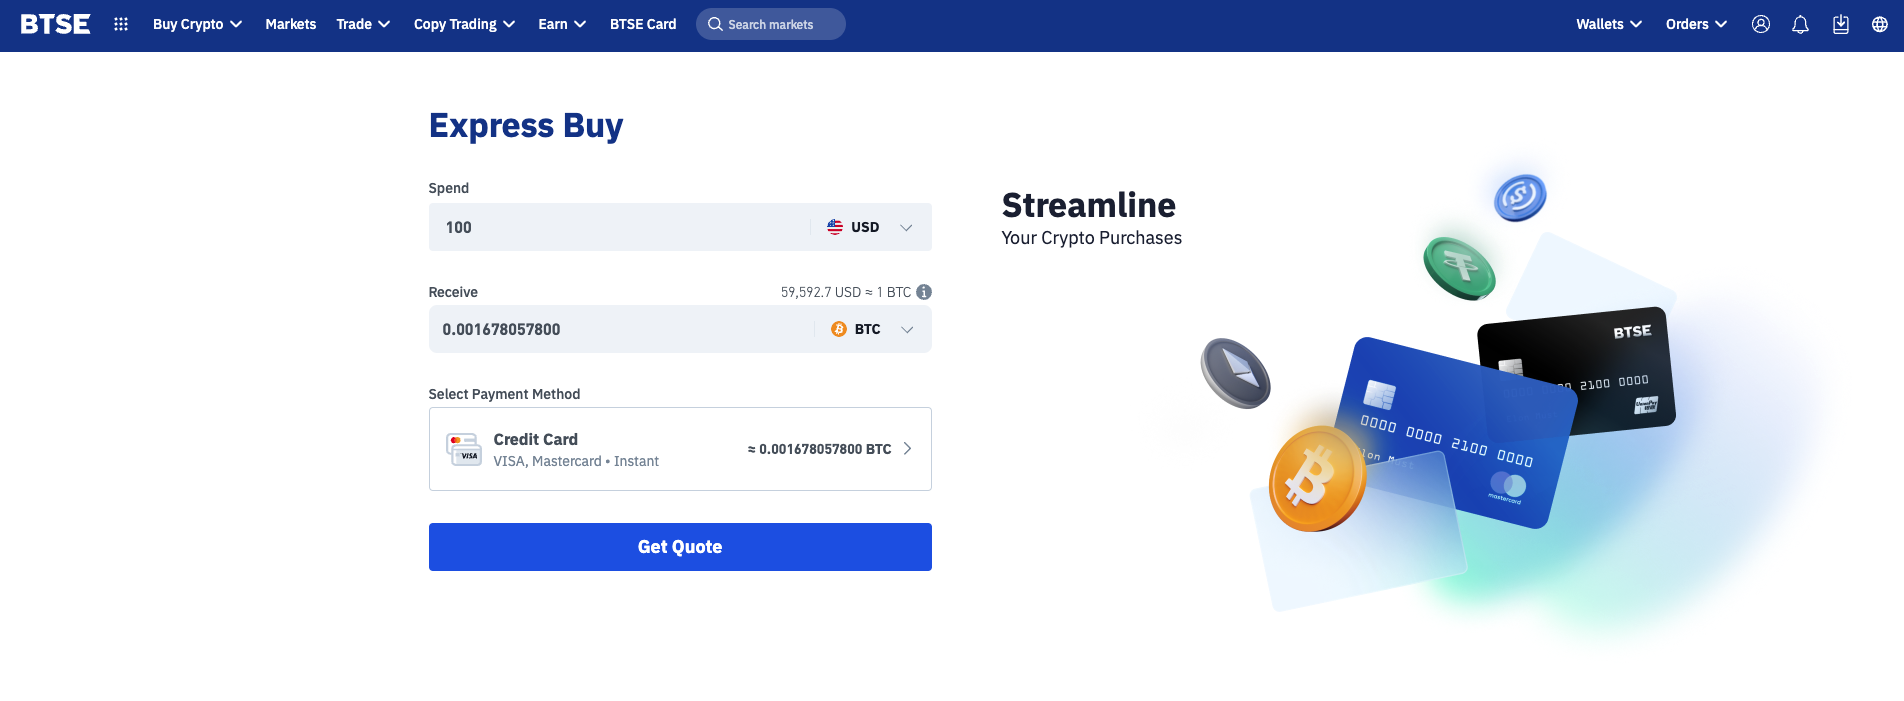 express buy crypto with fiat desktop 